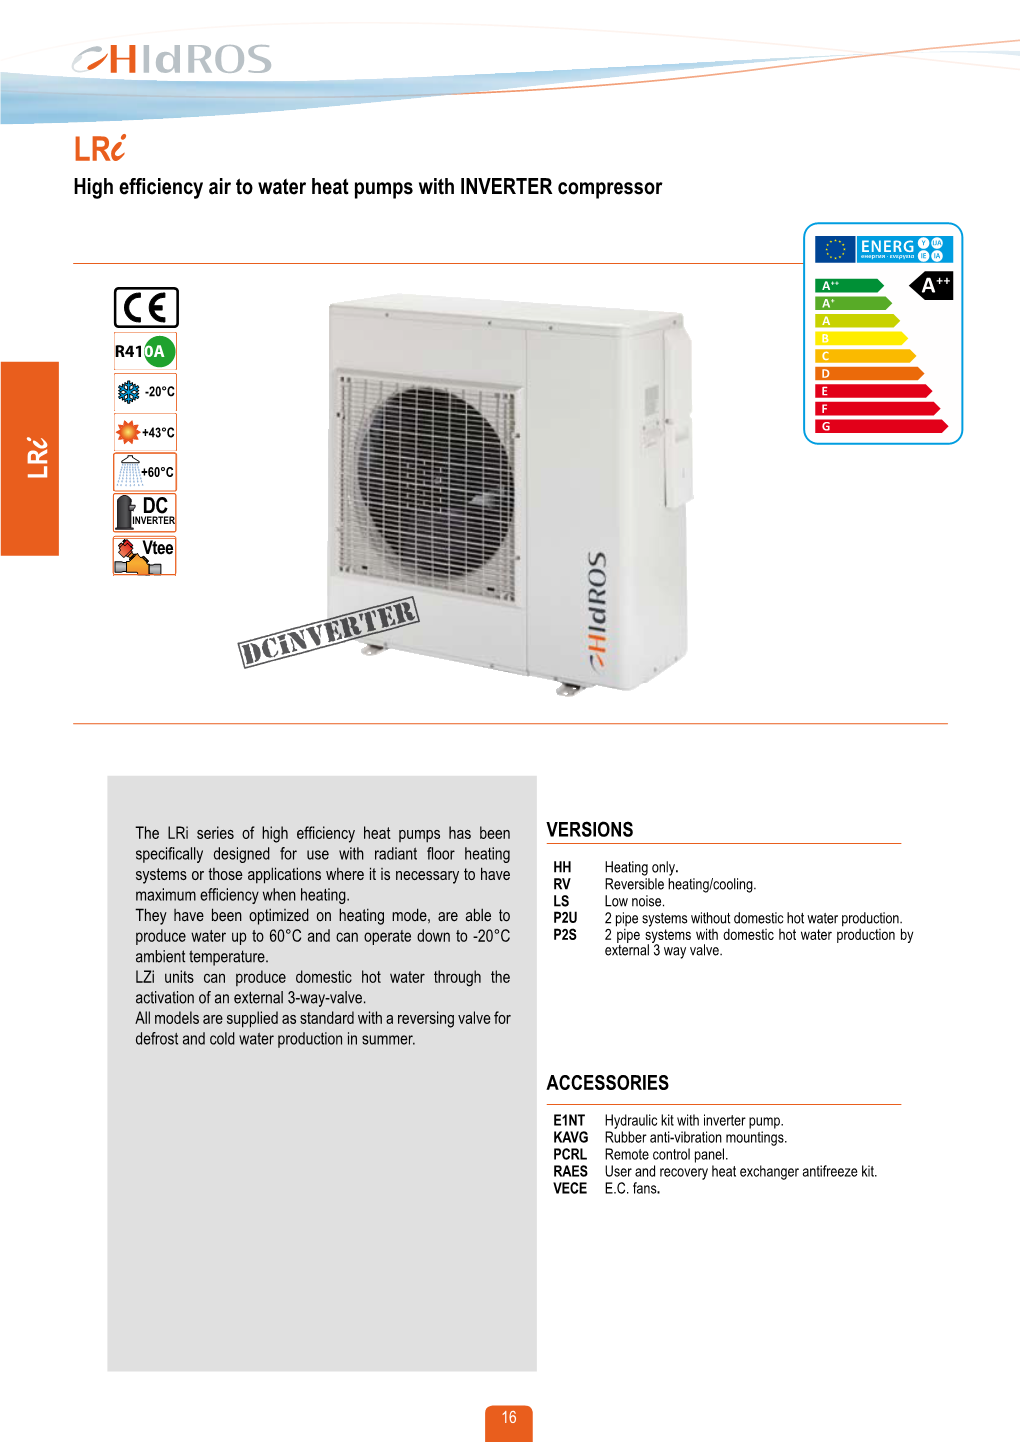 High Efficiency Air to Water Heat Pumps with INVERTER Compressor